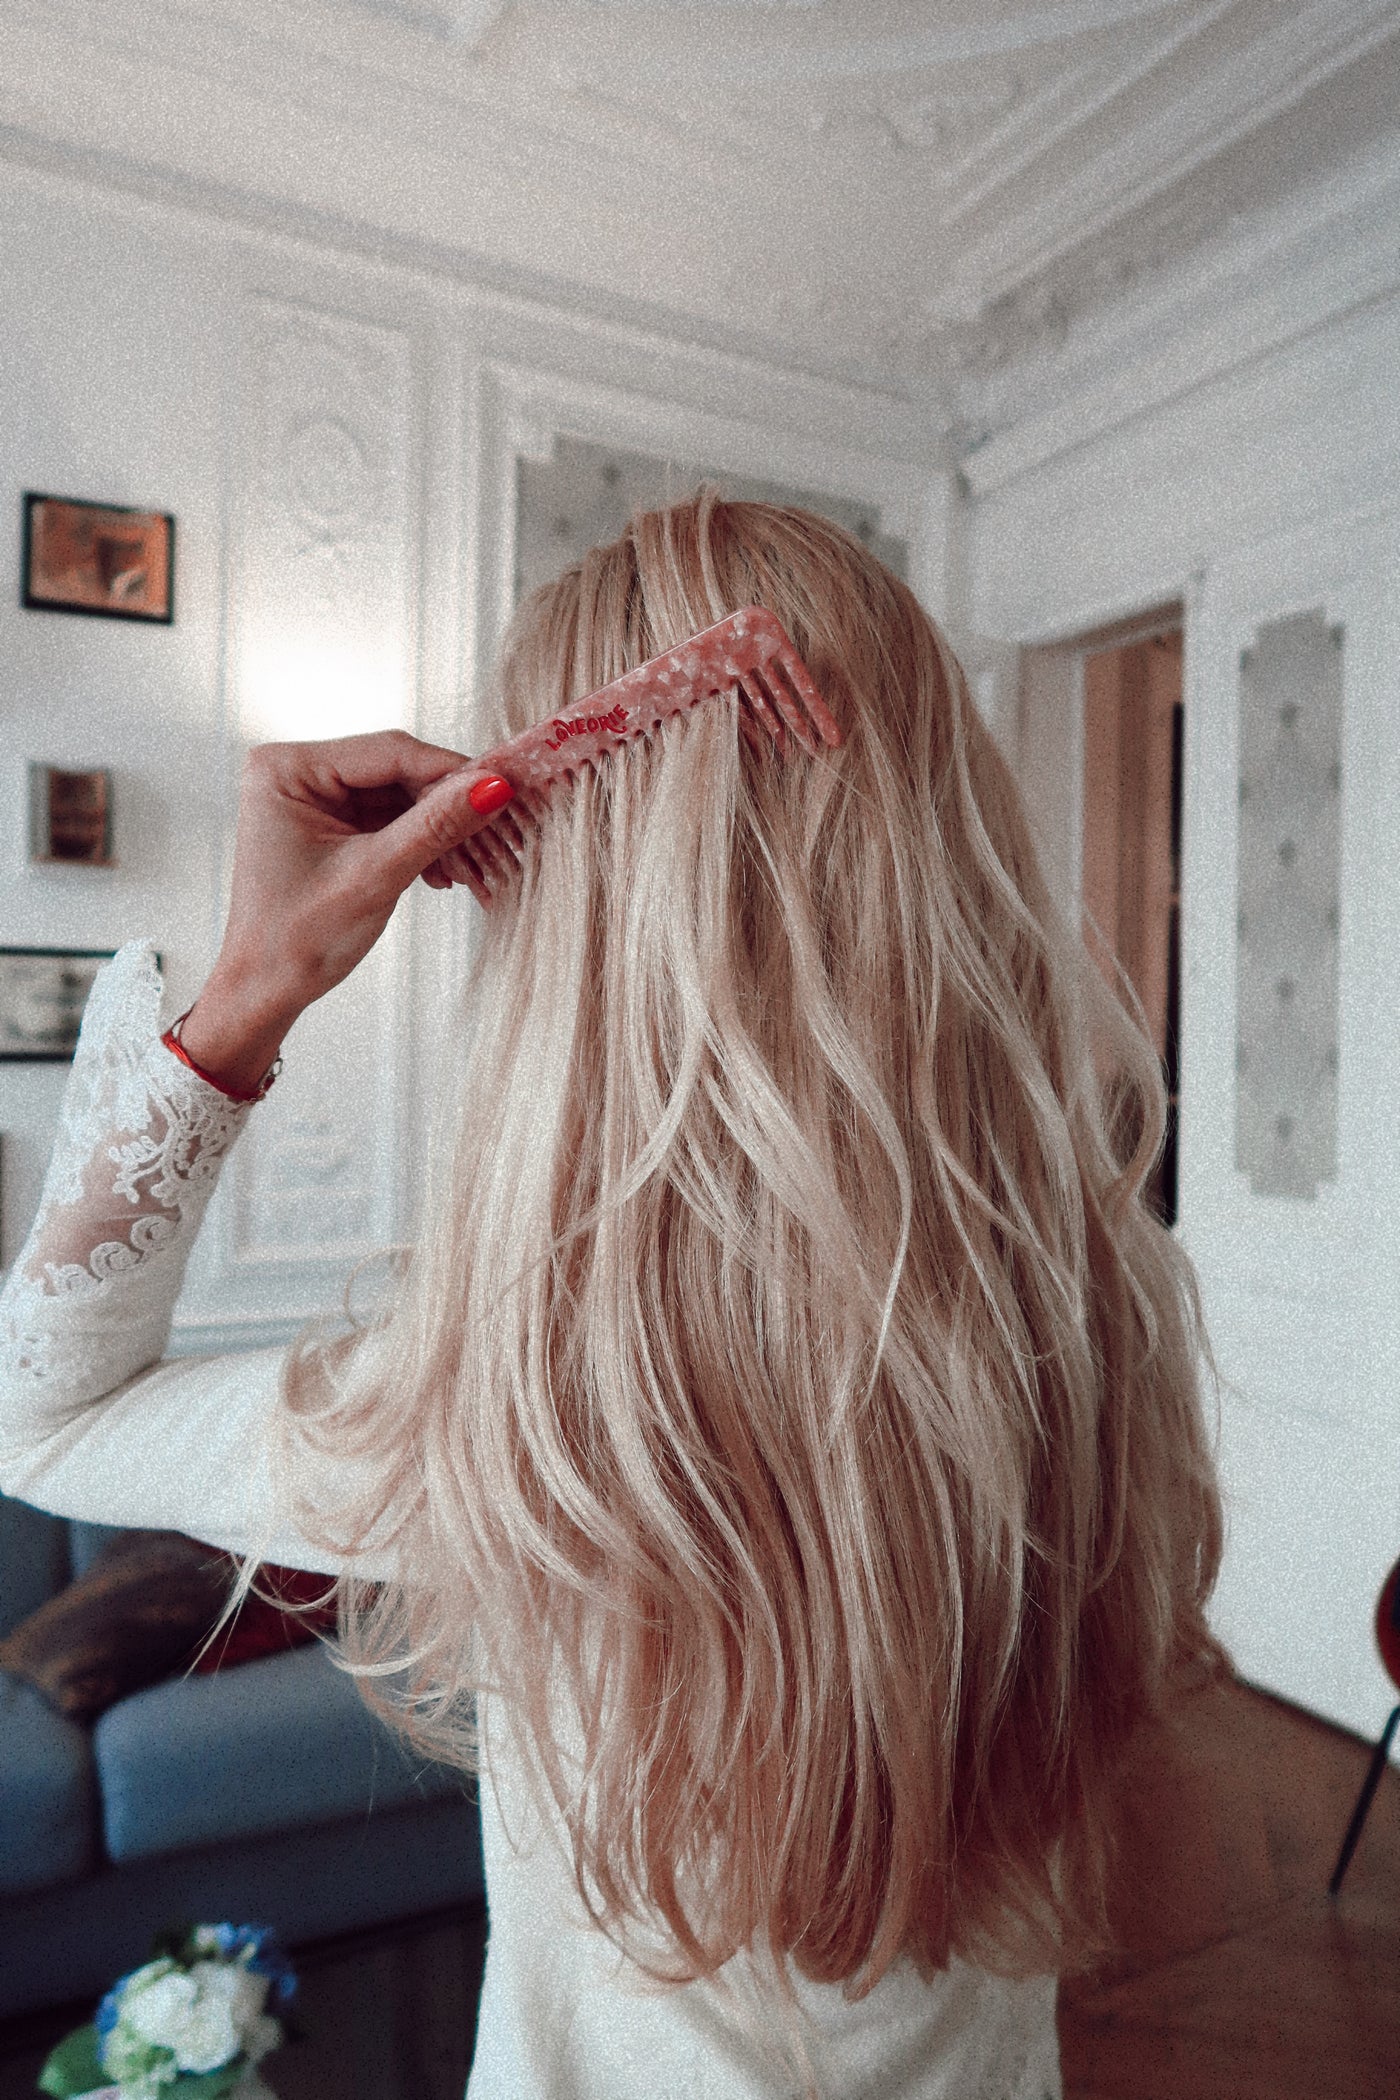 barb roby recommends Wavy Blonde Hair Tumblr